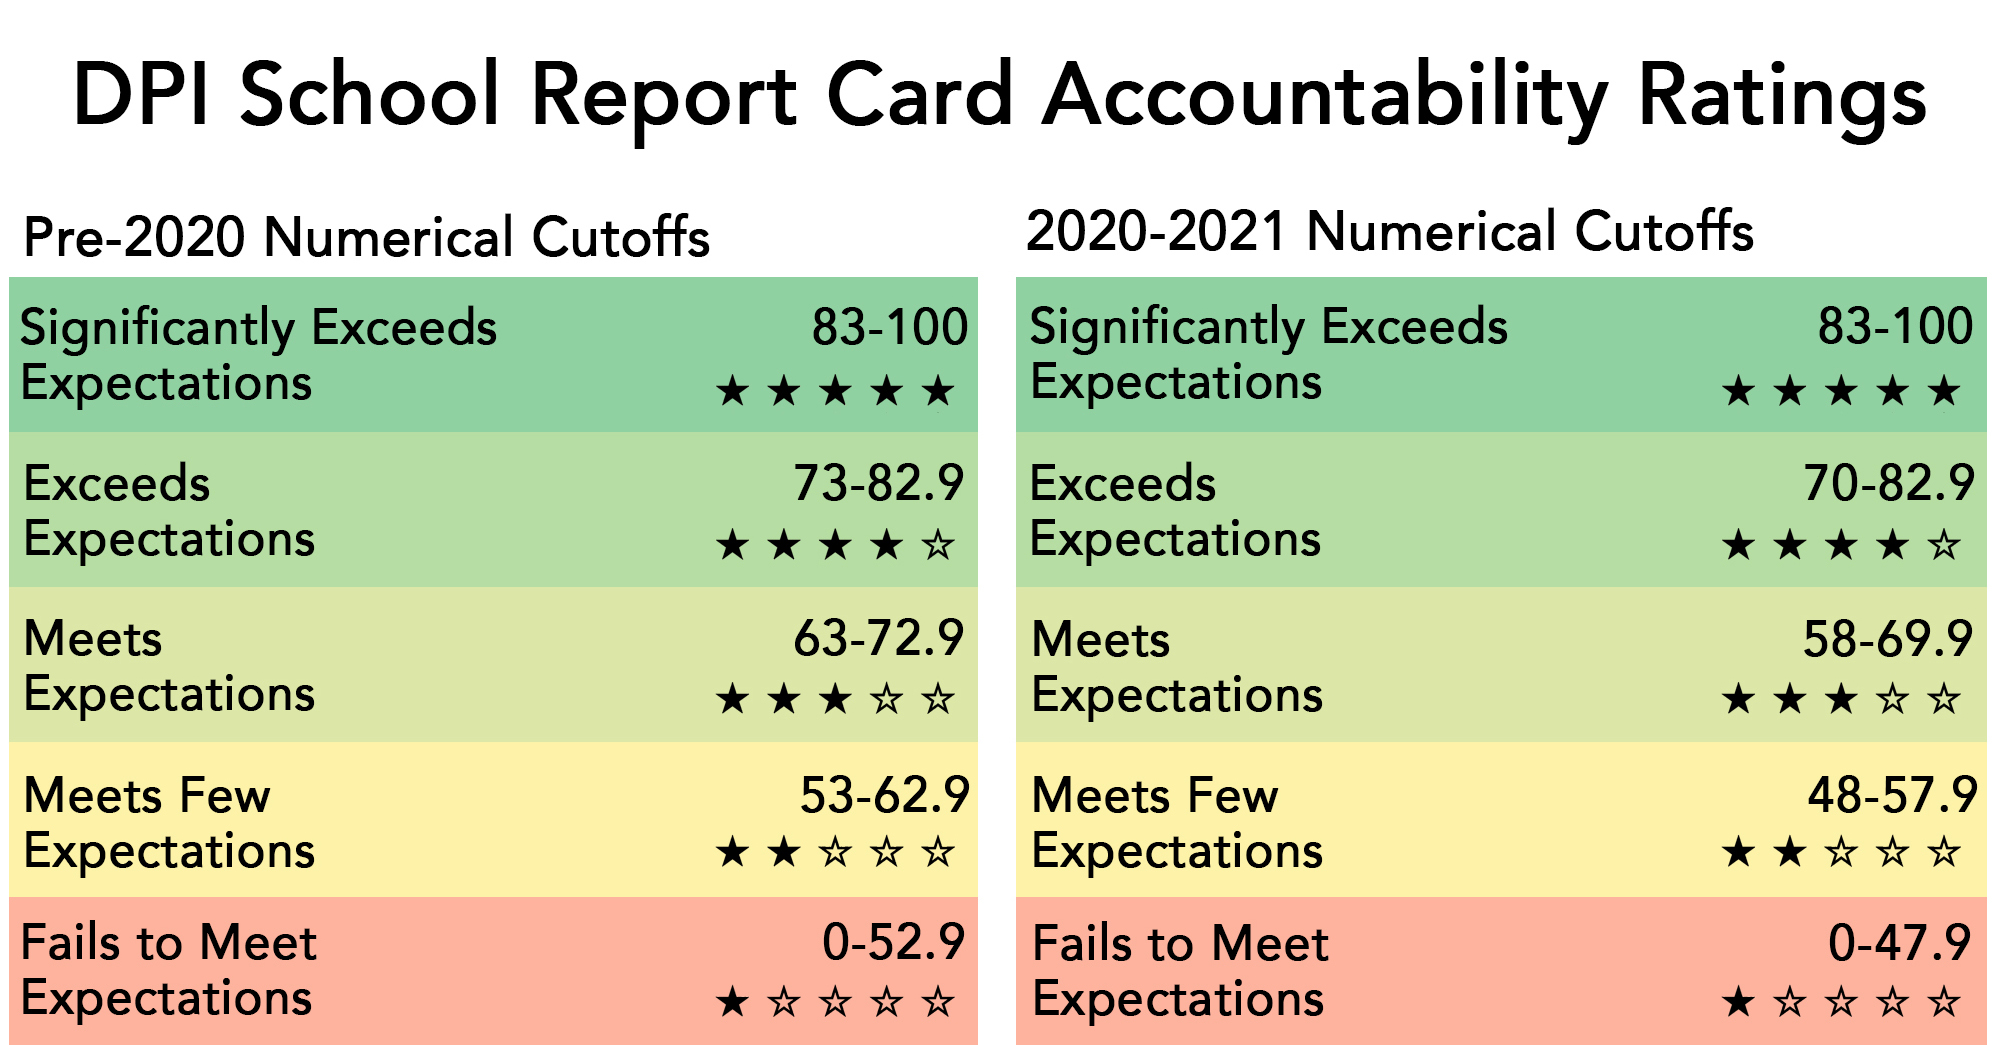 Score cutoffs for accountability ratings pre-2020 and for the 2020-2021 report cards